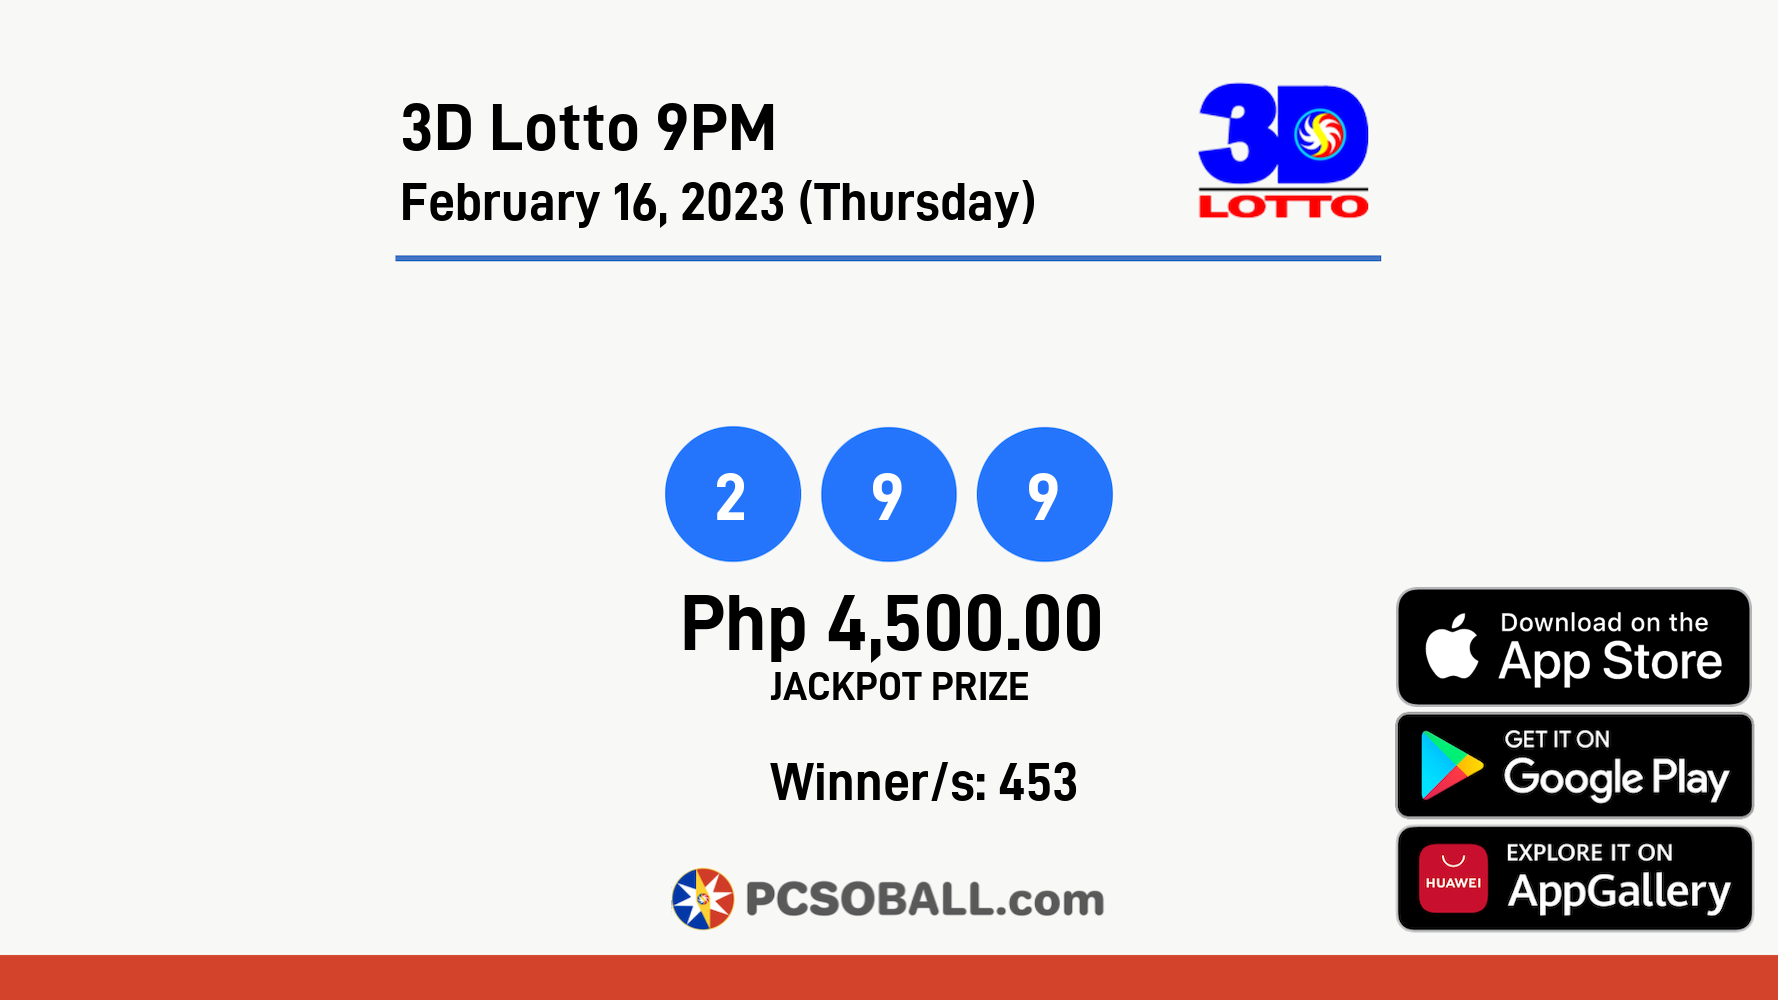 3D Lotto 9PM February 16, 2023 (Thursday) Result